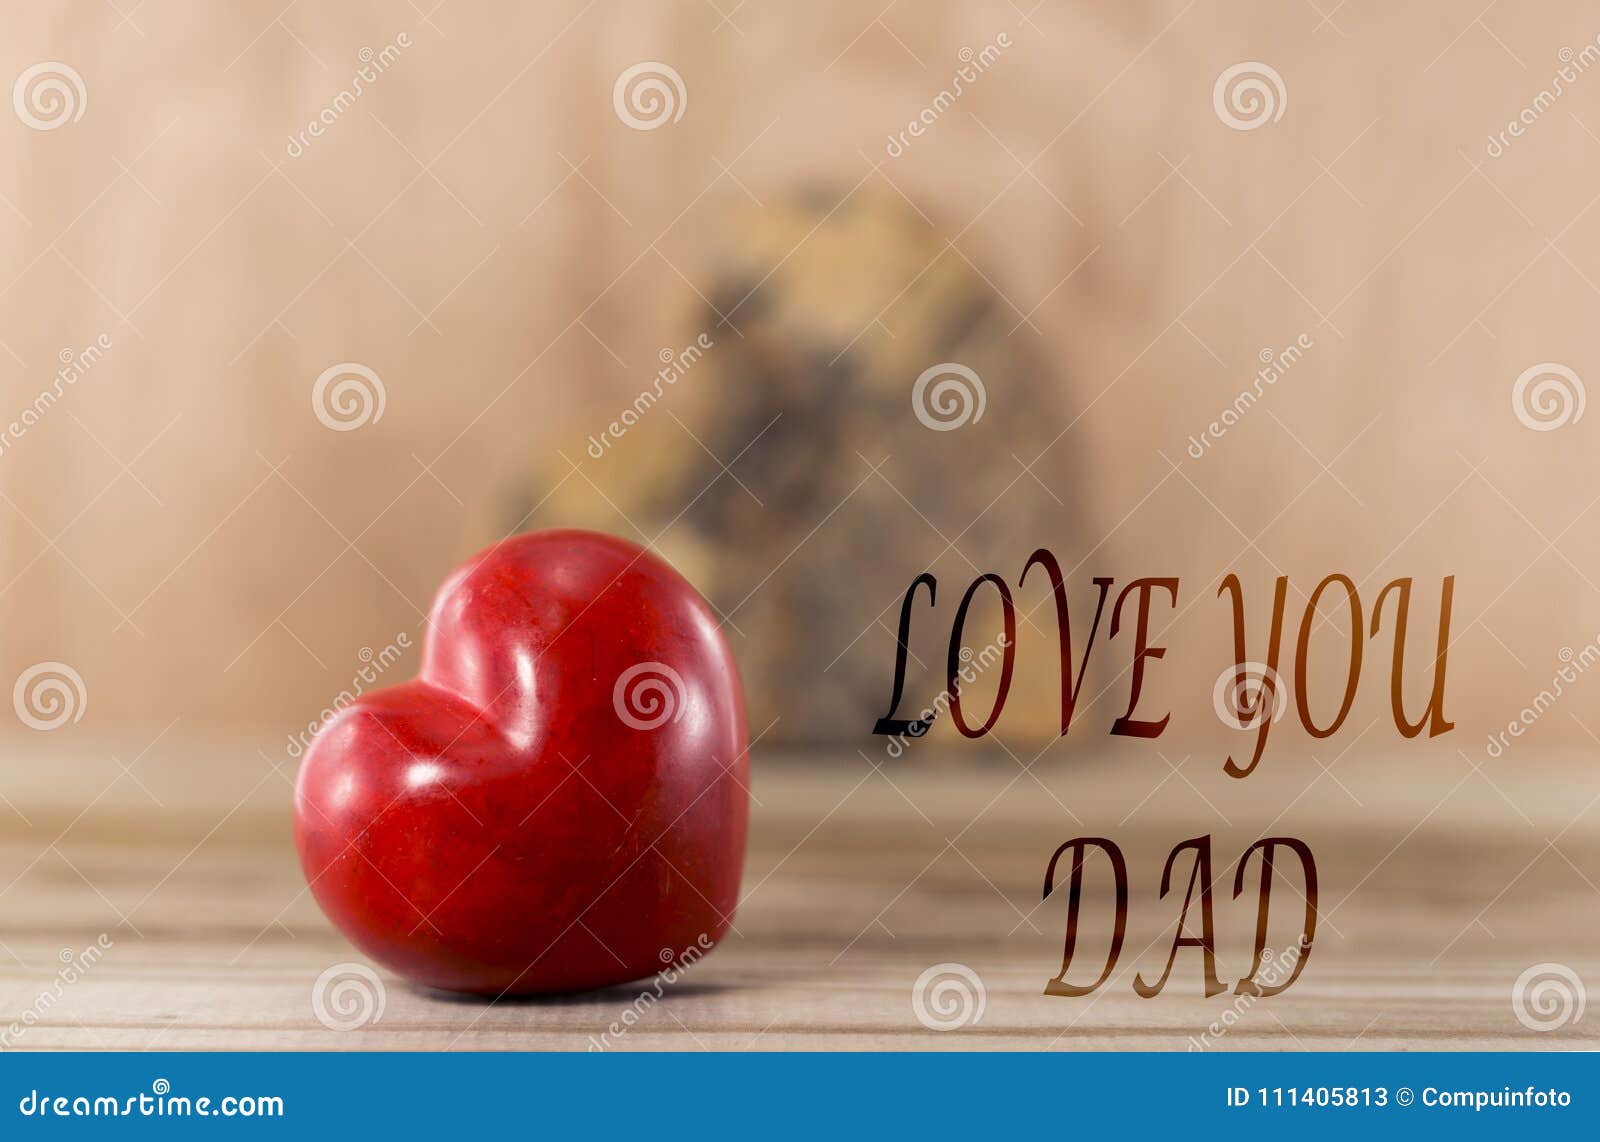 Fathers Day Love You Dad Stock Image Image Of Texture